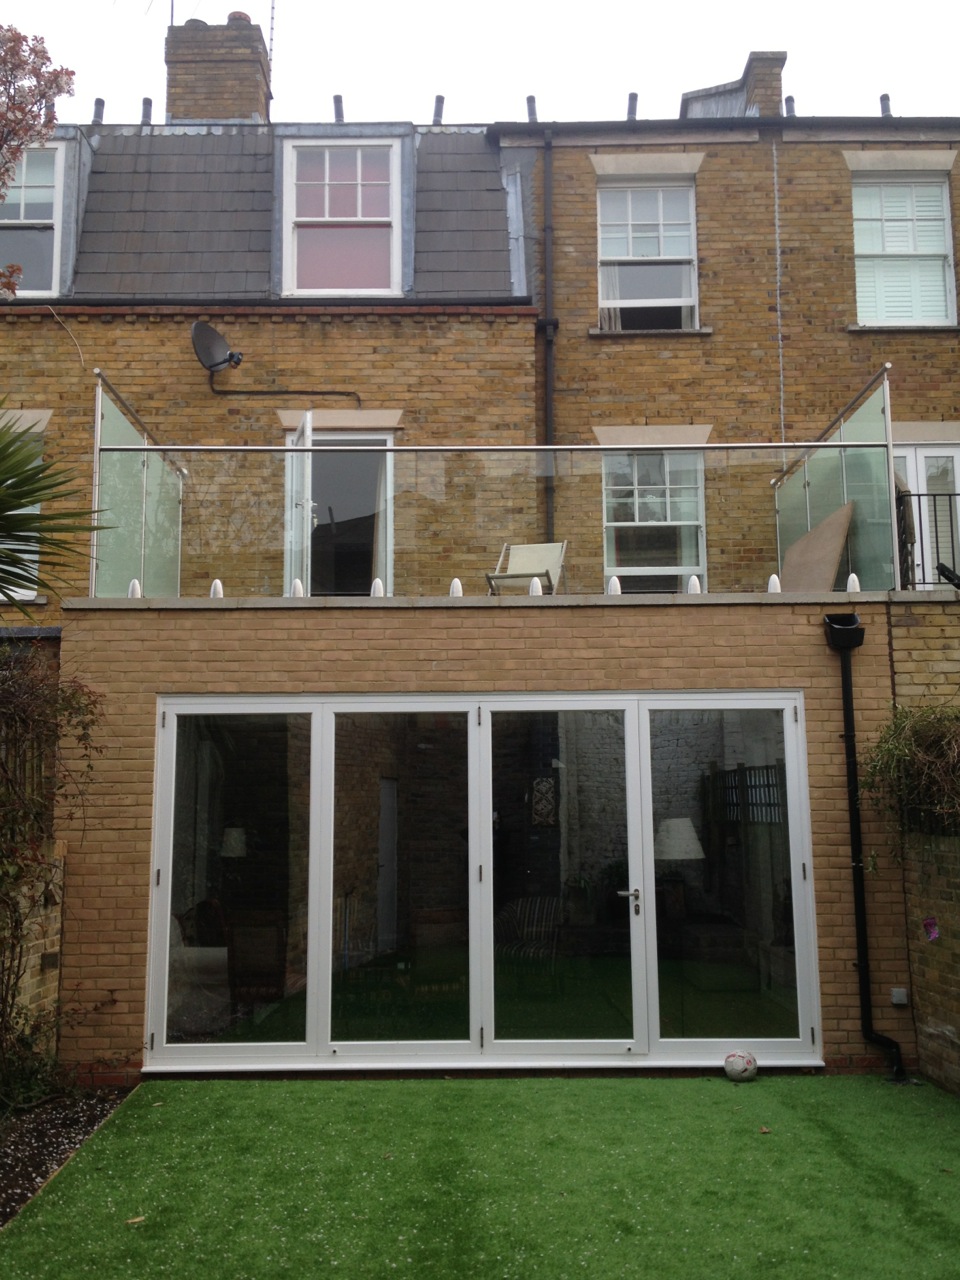 Design, domestic, extention, extra room, London, refurbishment, residential, Style Building